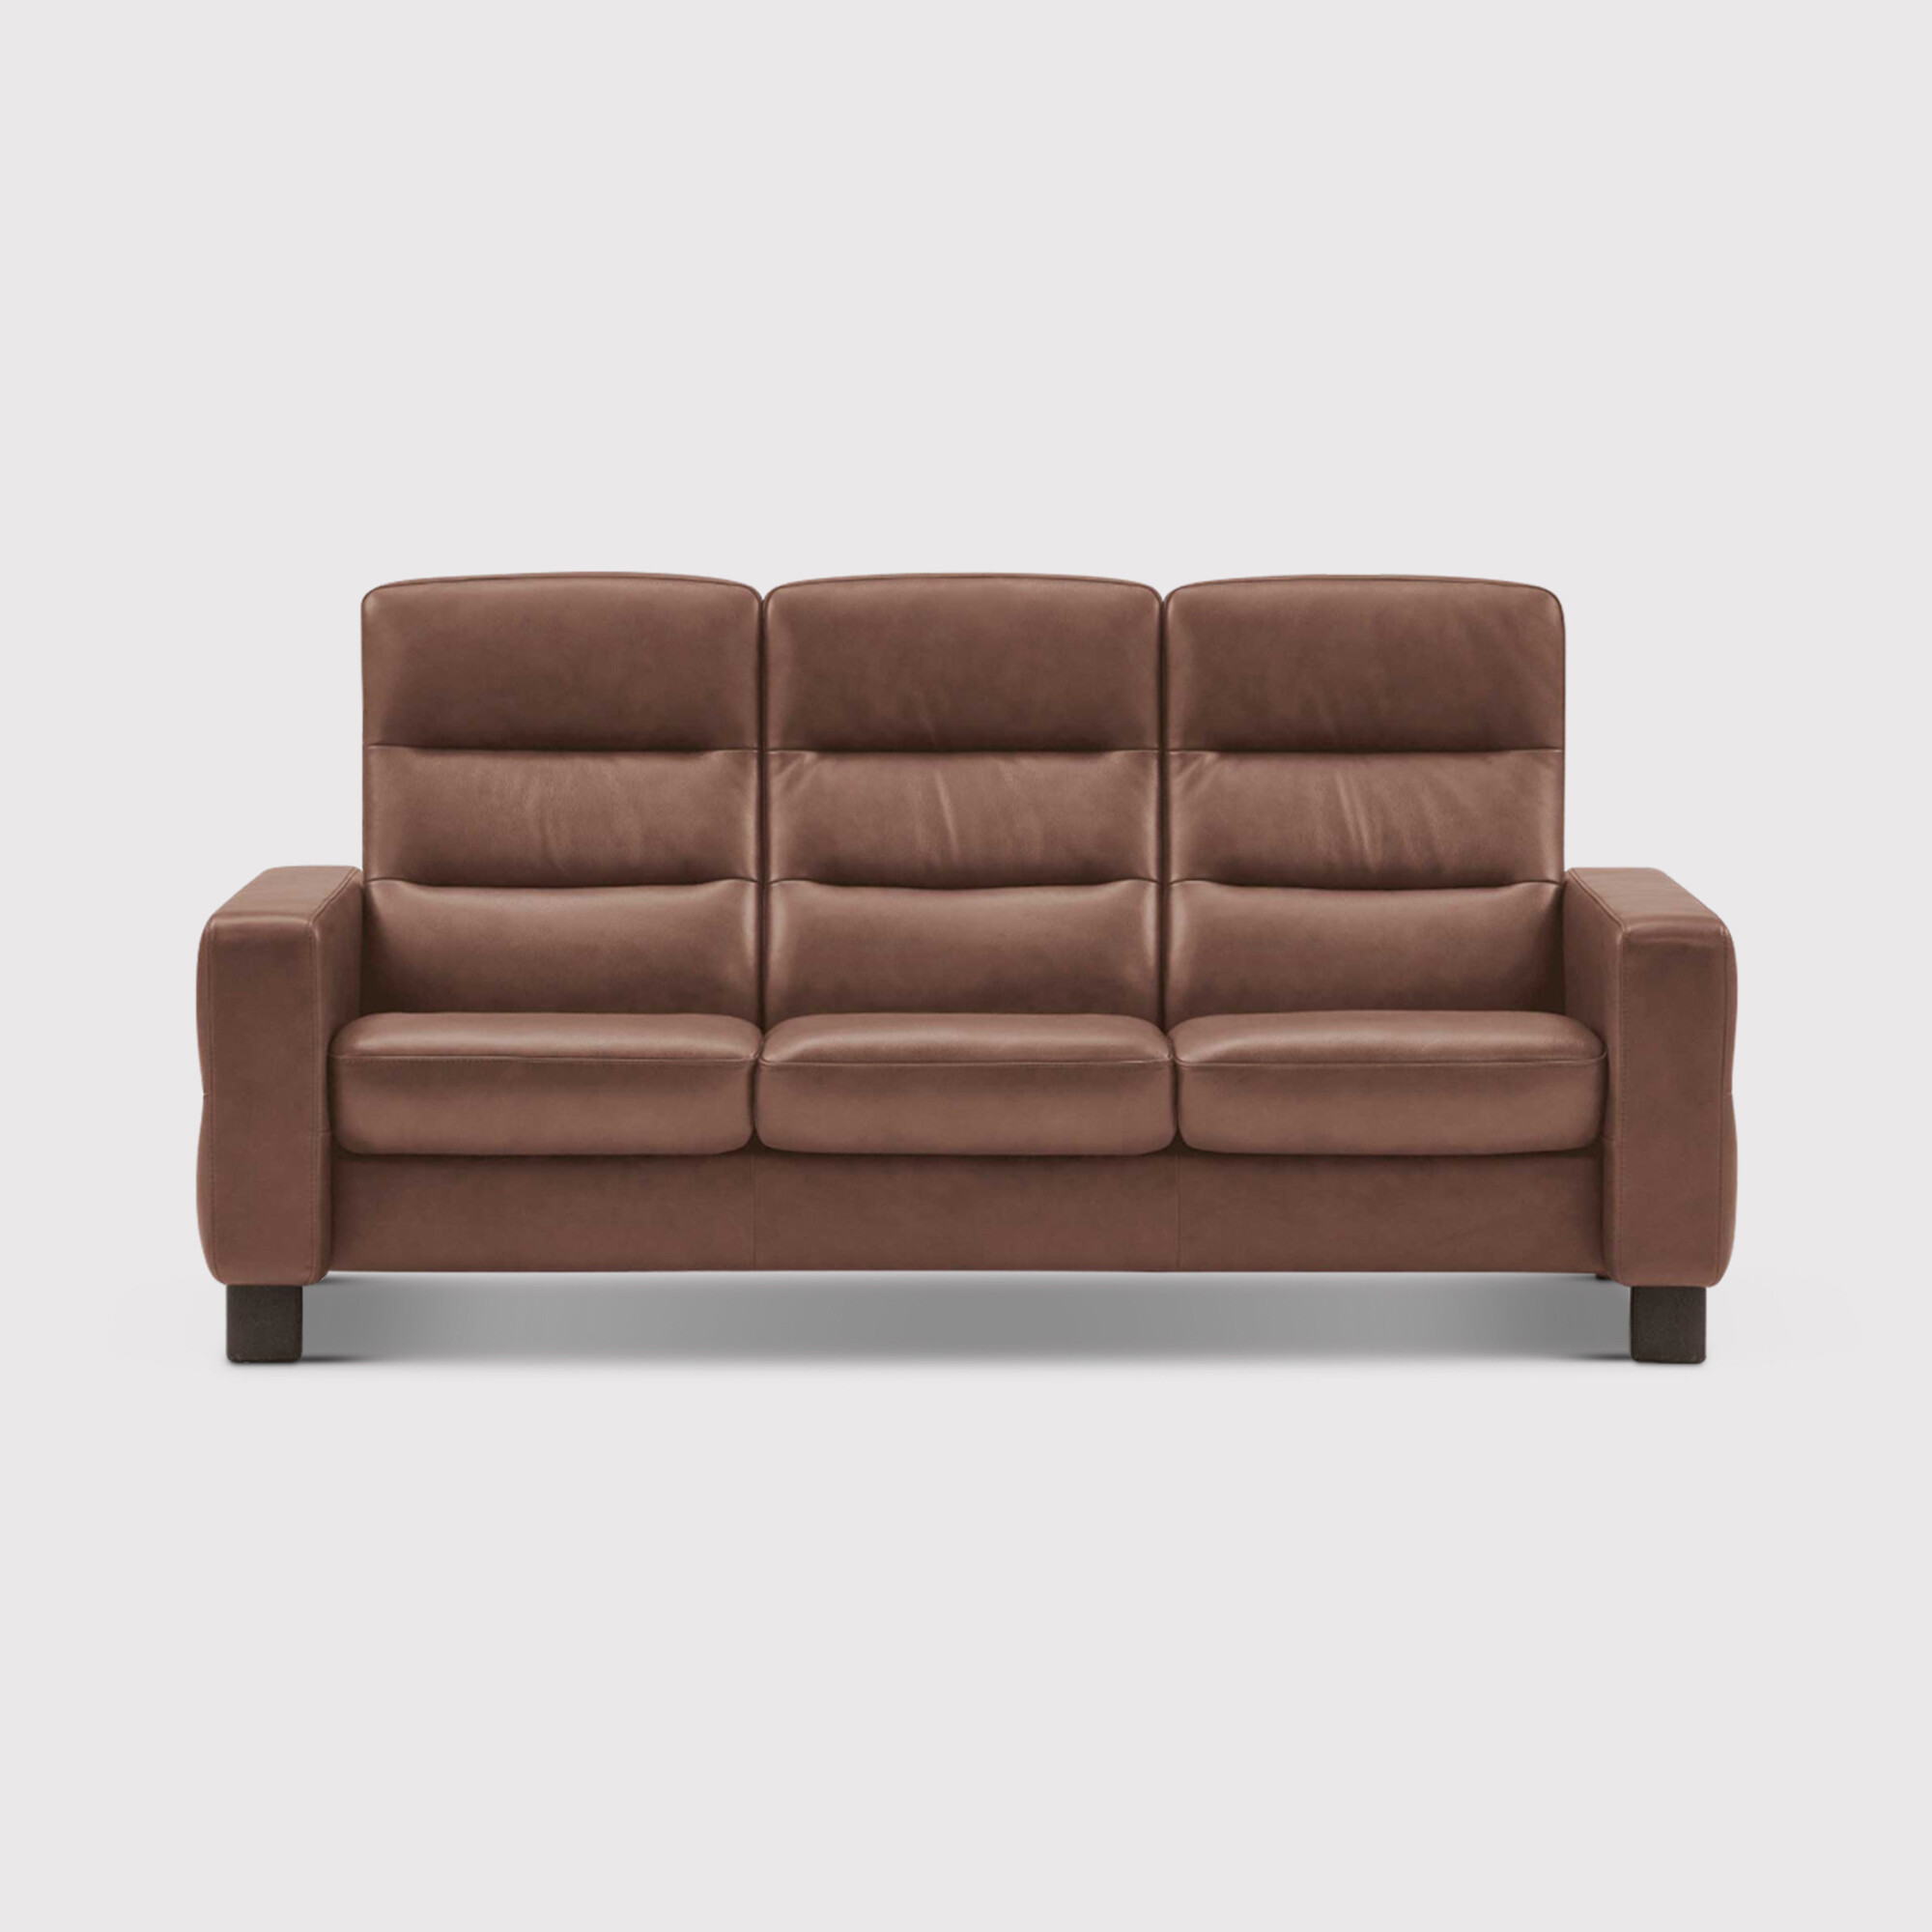 Stressless Wave High Back 3 Seater Recliner Sofa, Brown Leather | Barker & Stonehouse